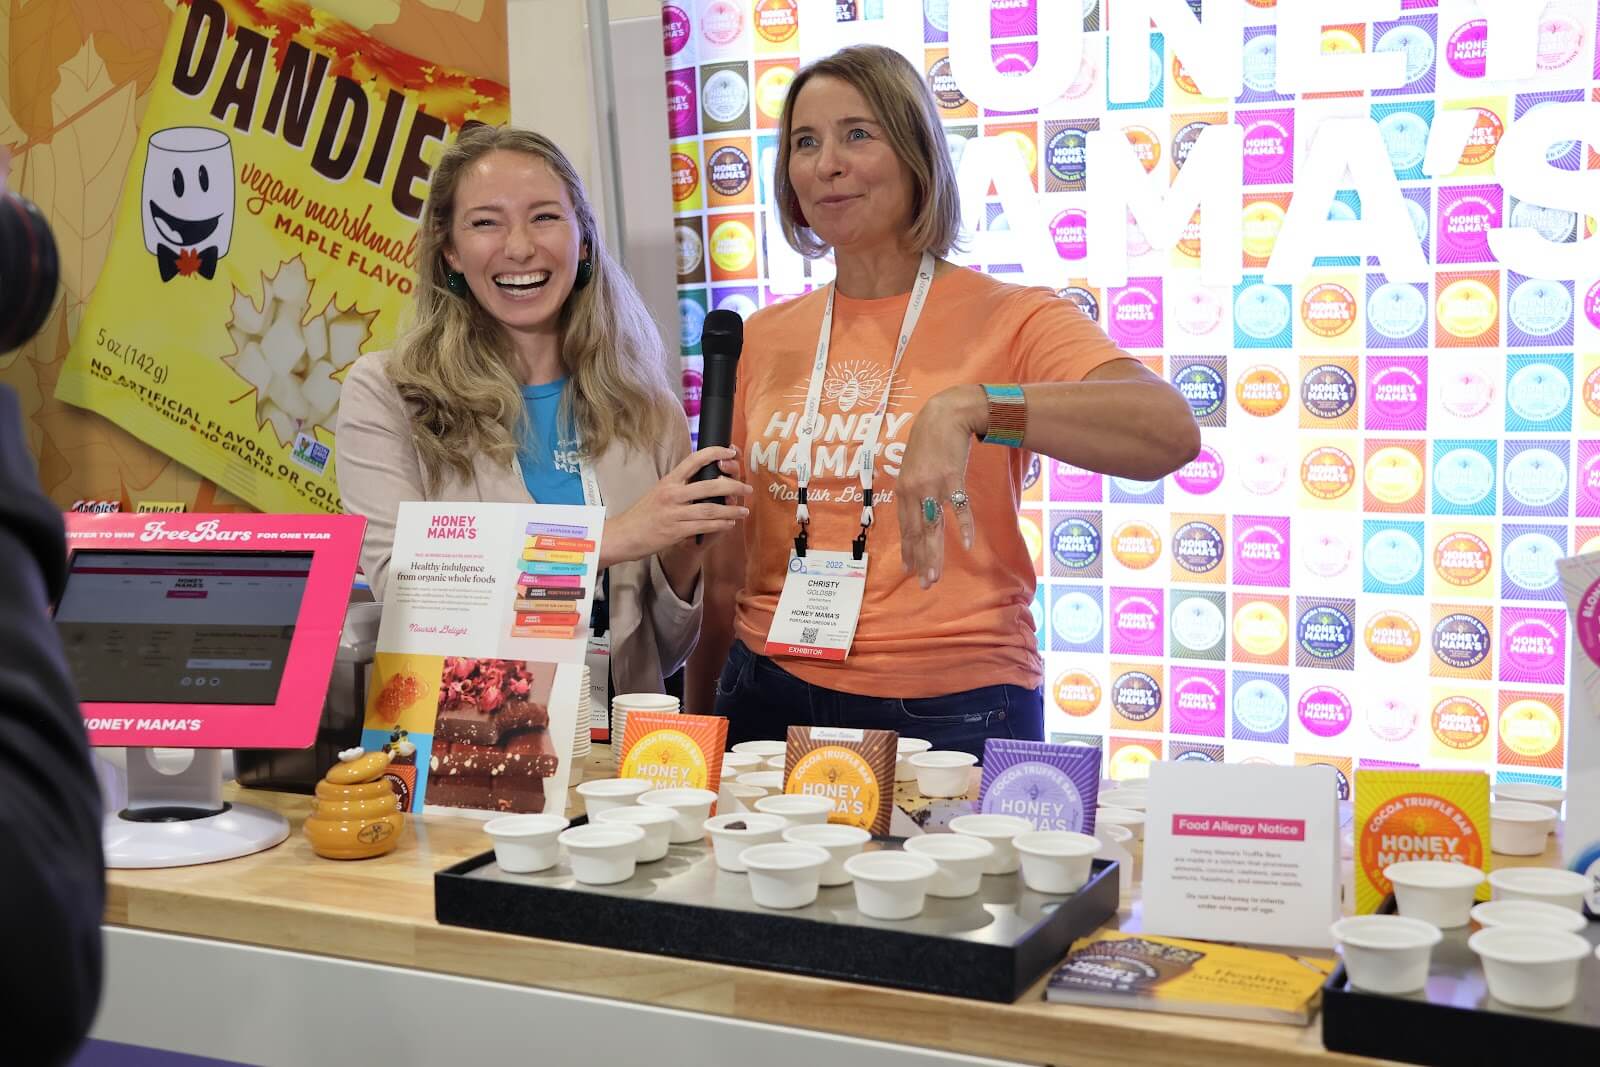 Angela Lukic and Christy Goldsby of Honey Mama's at expo east 2022